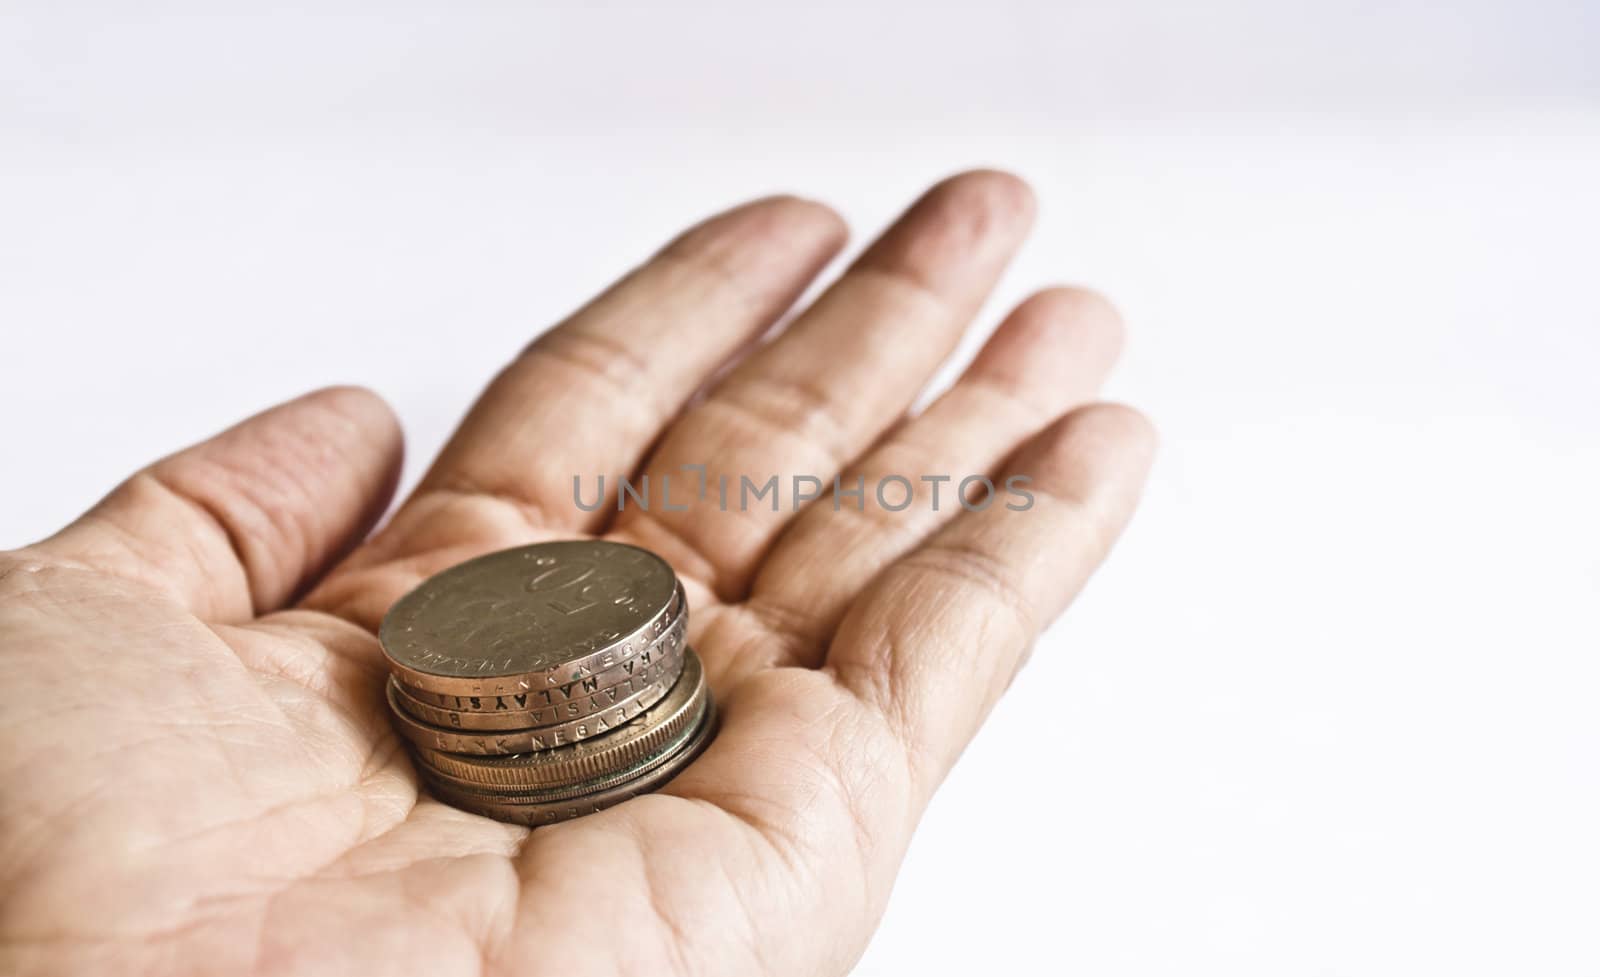 Some Coins in Hand by Sukha